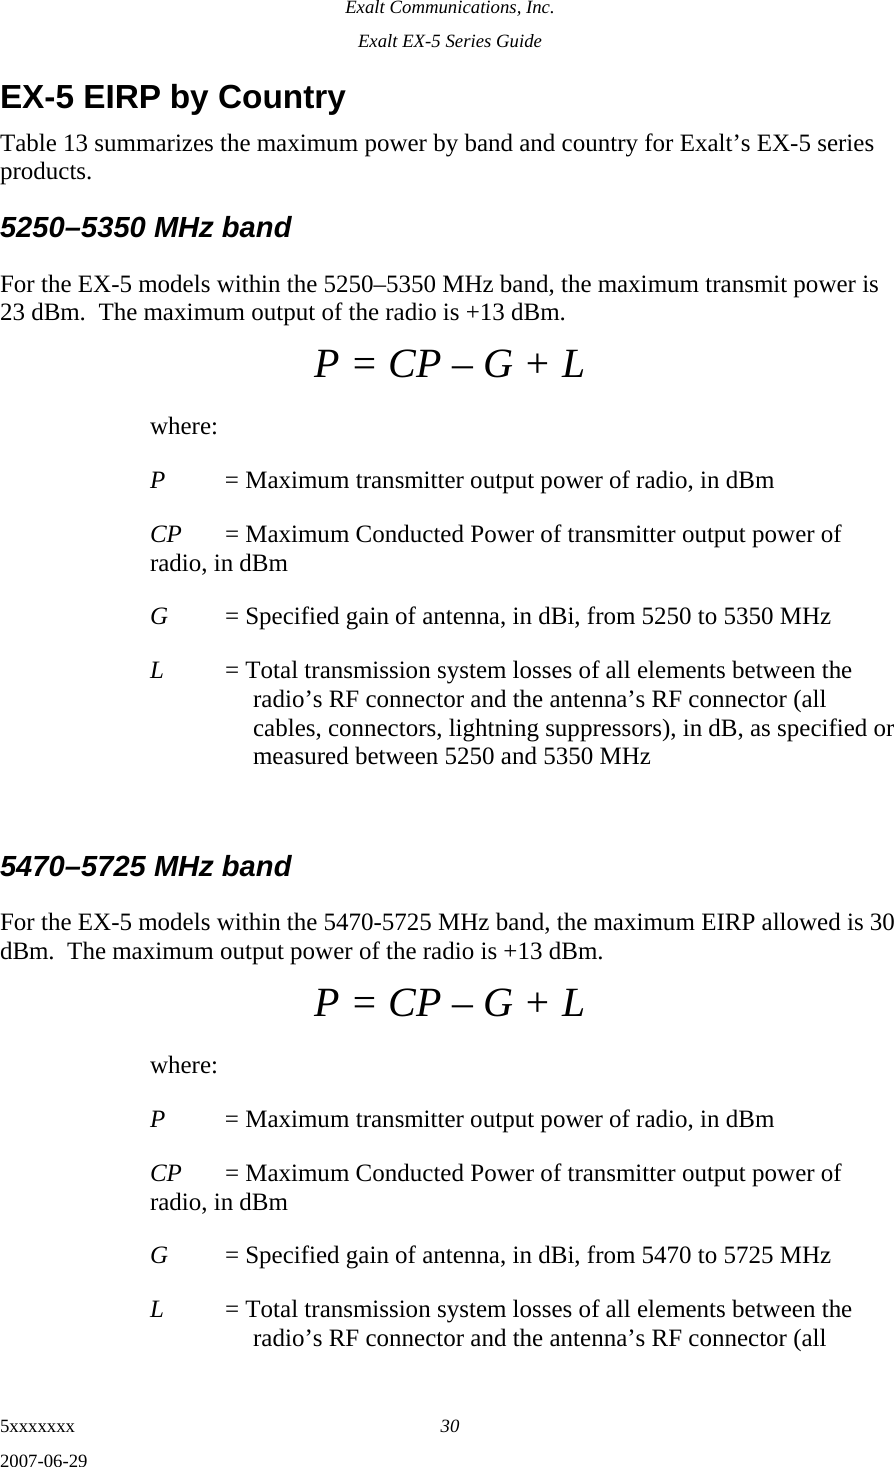 Exalt Communications, Inc. Exalt EX-5 Series Guide 5xxxxxxx  30 2007-06-29 EX-5 EIRP by Country Table 13 summarizes the maximum power by band and country for Exalt’s EX-5 series products.  5250–5350 MHz band For the EX-5 models within the 5250–5350 MHz band, the maximum transmit power is 23 dBm.  The maximum output of the radio is +13 dBm. P = CP – G + L where: P  = Maximum transmitter output power of radio, in dBm CP  = Maximum Conducted Power of transmitter output power of radio, in dBm G  = Specified gain of antenna, in dBi, from 5250 to 5350 MHz L  = Total transmission system losses of all elements between the radio’s RF connector and the antenna’s RF connector (all cables, connectors, lightning suppressors), in dB, as specified or measured between 5250 and 5350 MHz  5470–5725 MHz band For the EX-5 models within the 5470-5725 MHz band, the maximum EIRP allowed is 30 dBm.  The maximum output power of the radio is +13 dBm.   P = CP – G + L where: P  = Maximum transmitter output power of radio, in dBm CP  = Maximum Conducted Power of transmitter output power of radio, in dBm G  = Specified gain of antenna, in dBi, from 5470 to 5725 MHz L  = Total transmission system losses of all elements between the radio’s RF connector and the antenna’s RF connector (all 